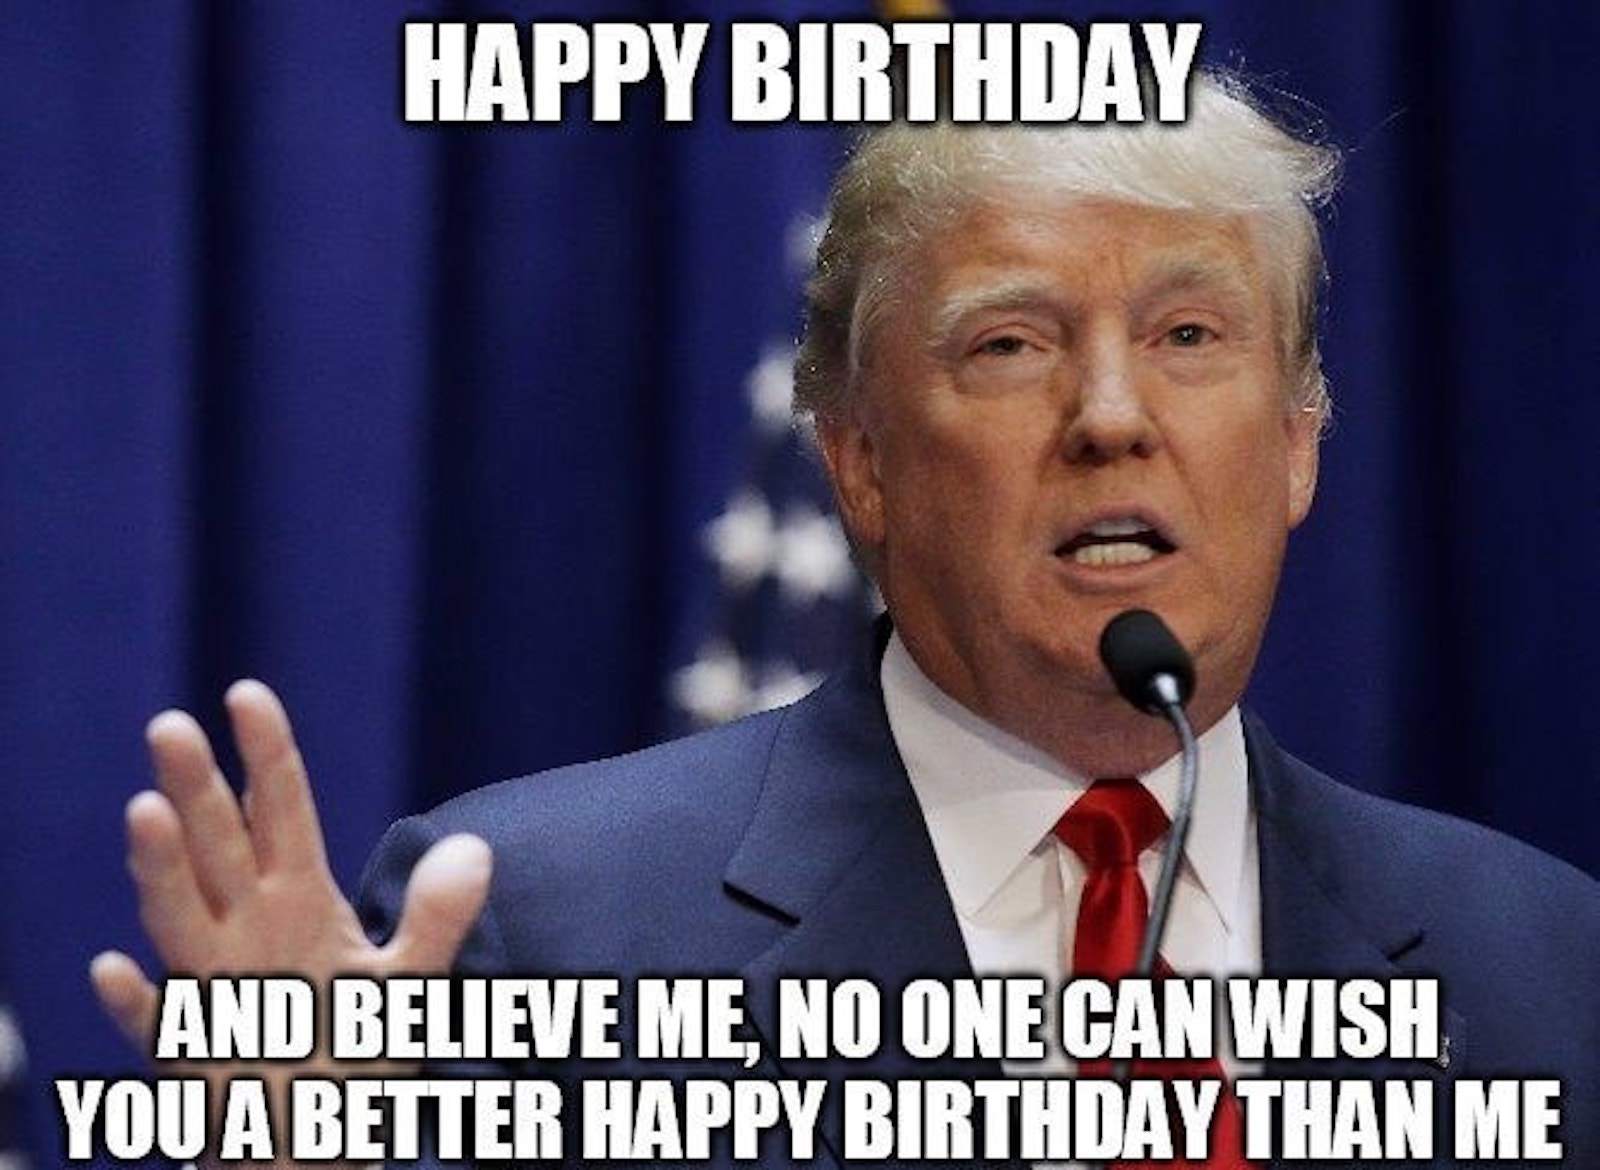 Happy Birthday Donald Trump meme done better than any other memes